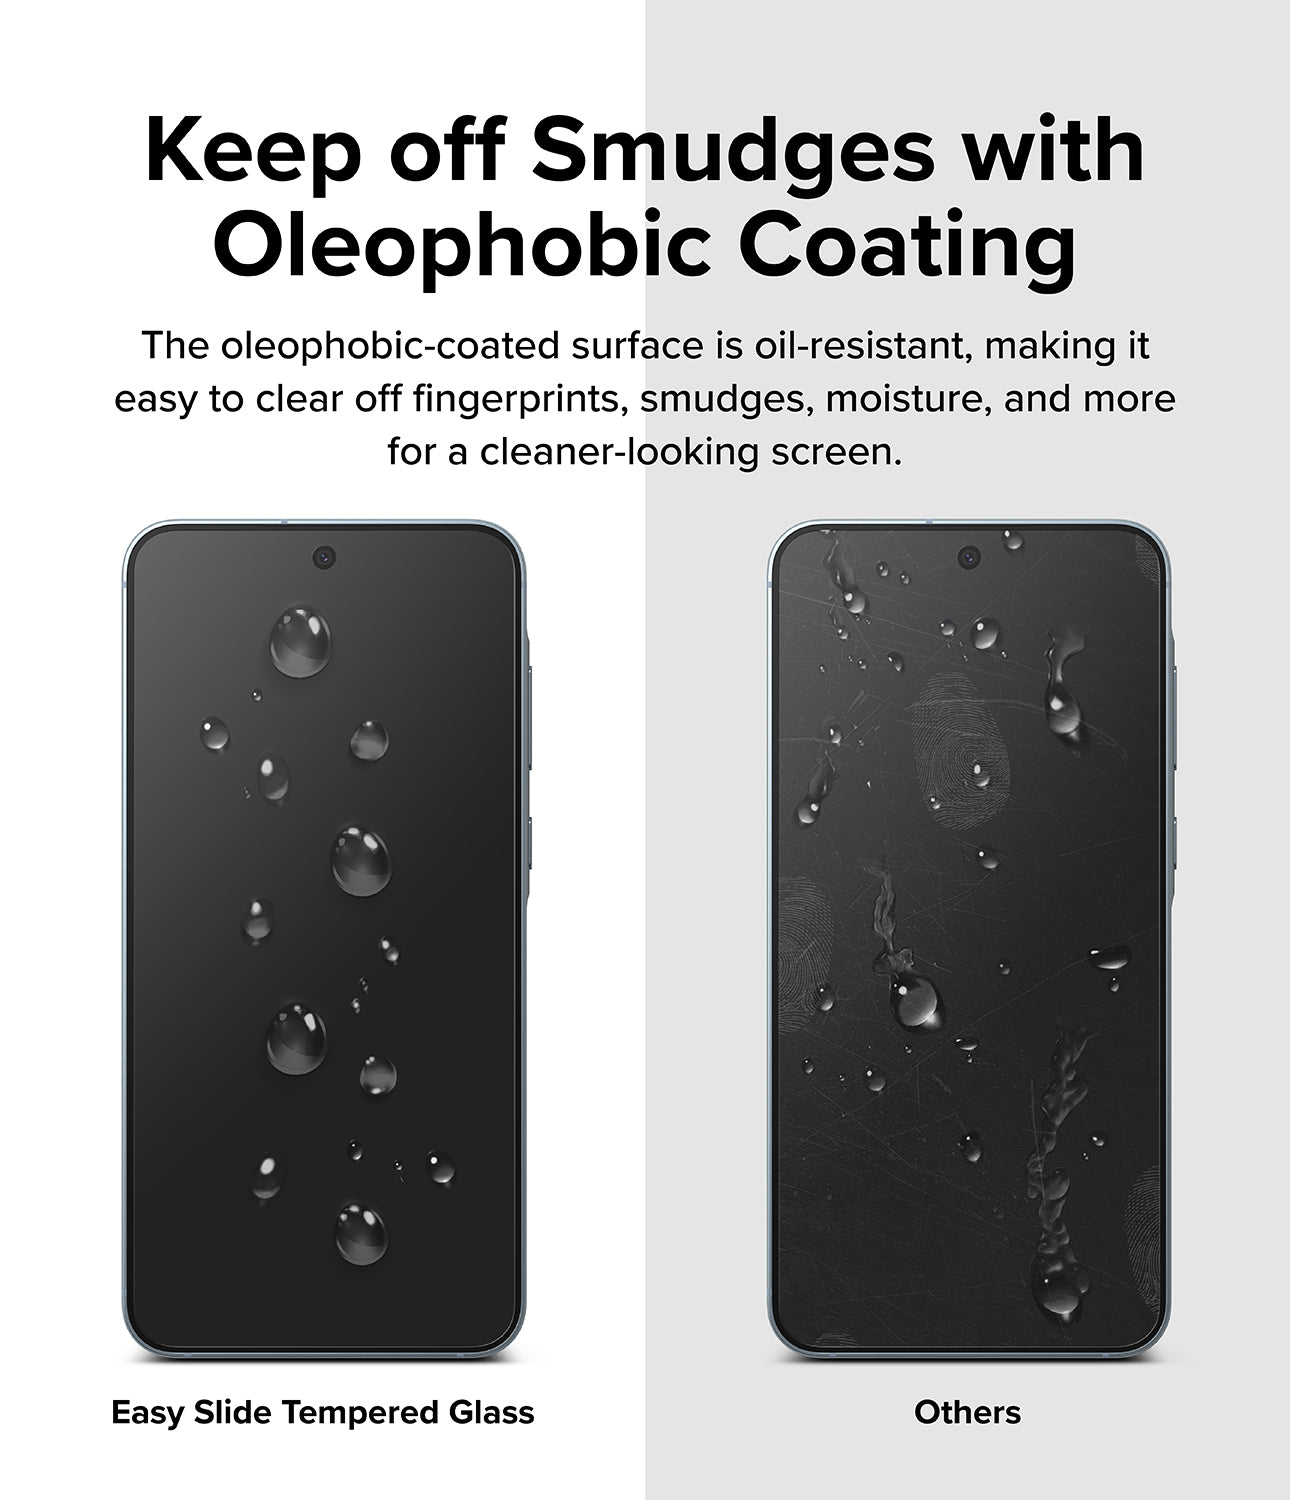 Galaxy A55 Screen Protector | Easy Slide Tempered Glass - Keep off Smudges with Oleophobic Coating. The oleophobic-coated surface is oil-resistant, making it easy to clear off fingerprints, smudges, moisture, and more for a cleaner-looking screen.